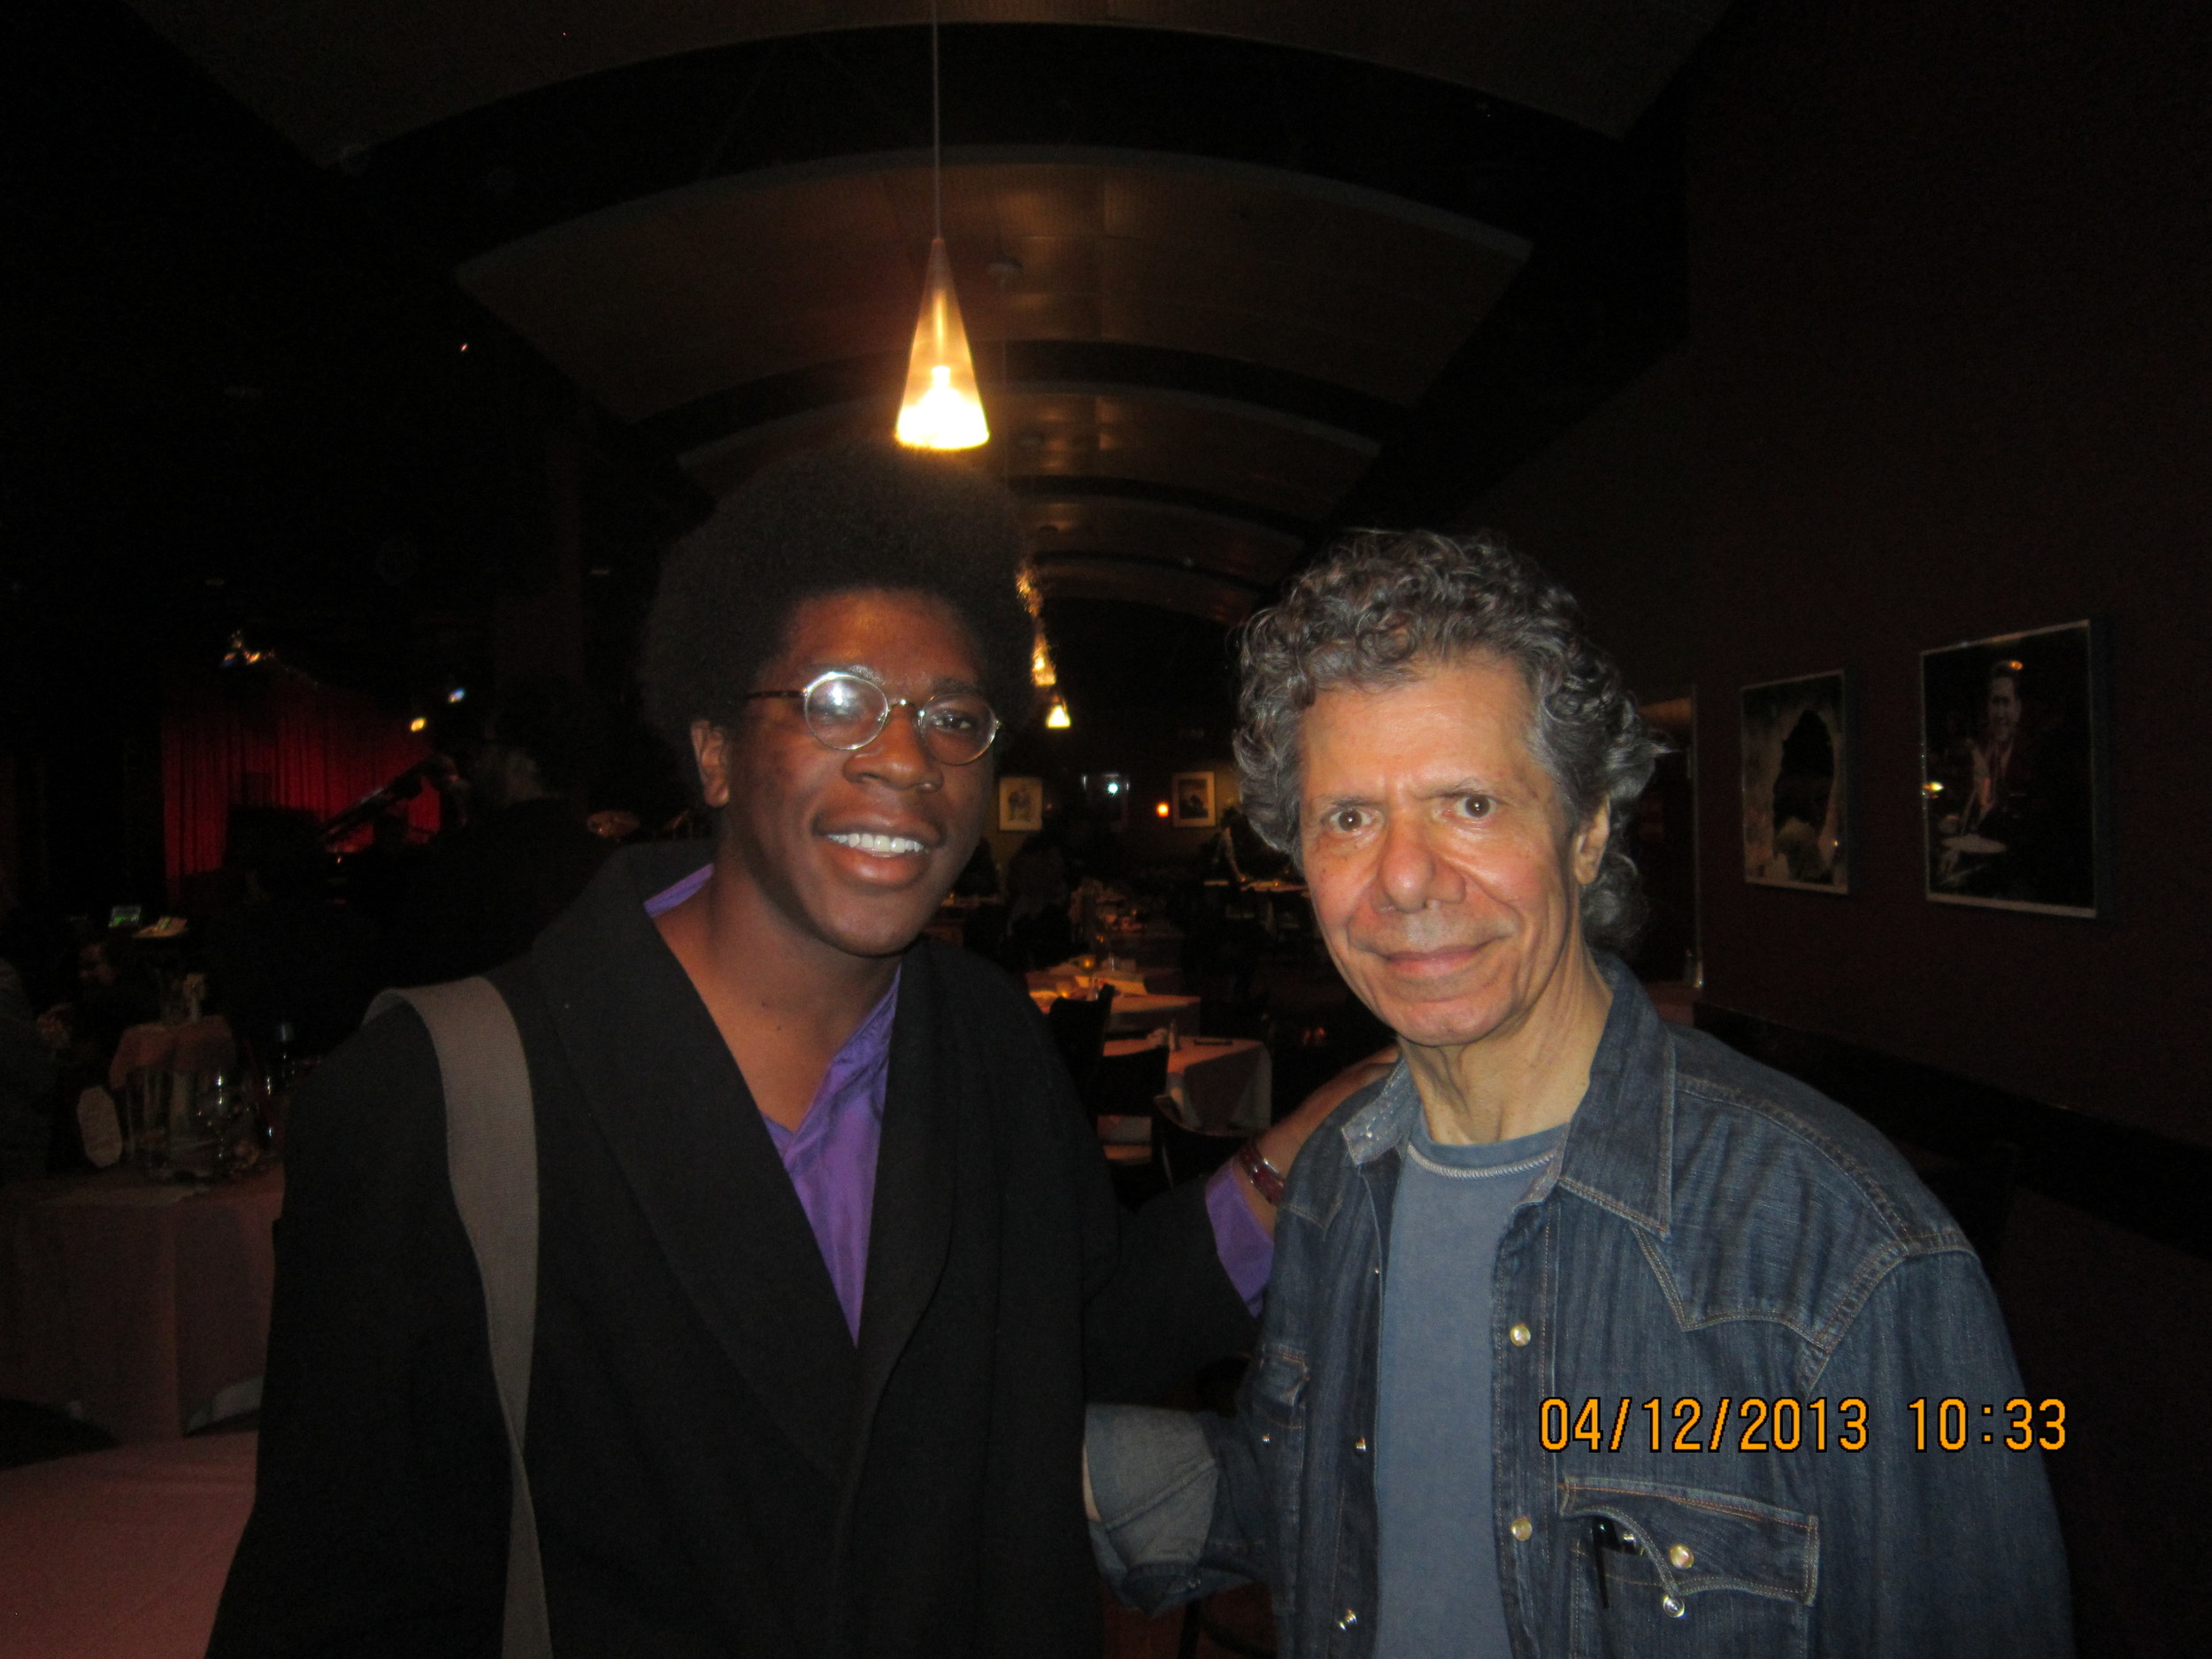 First time I got to meet Chick Corea at Catalina Jazz Club in Los Angeles.